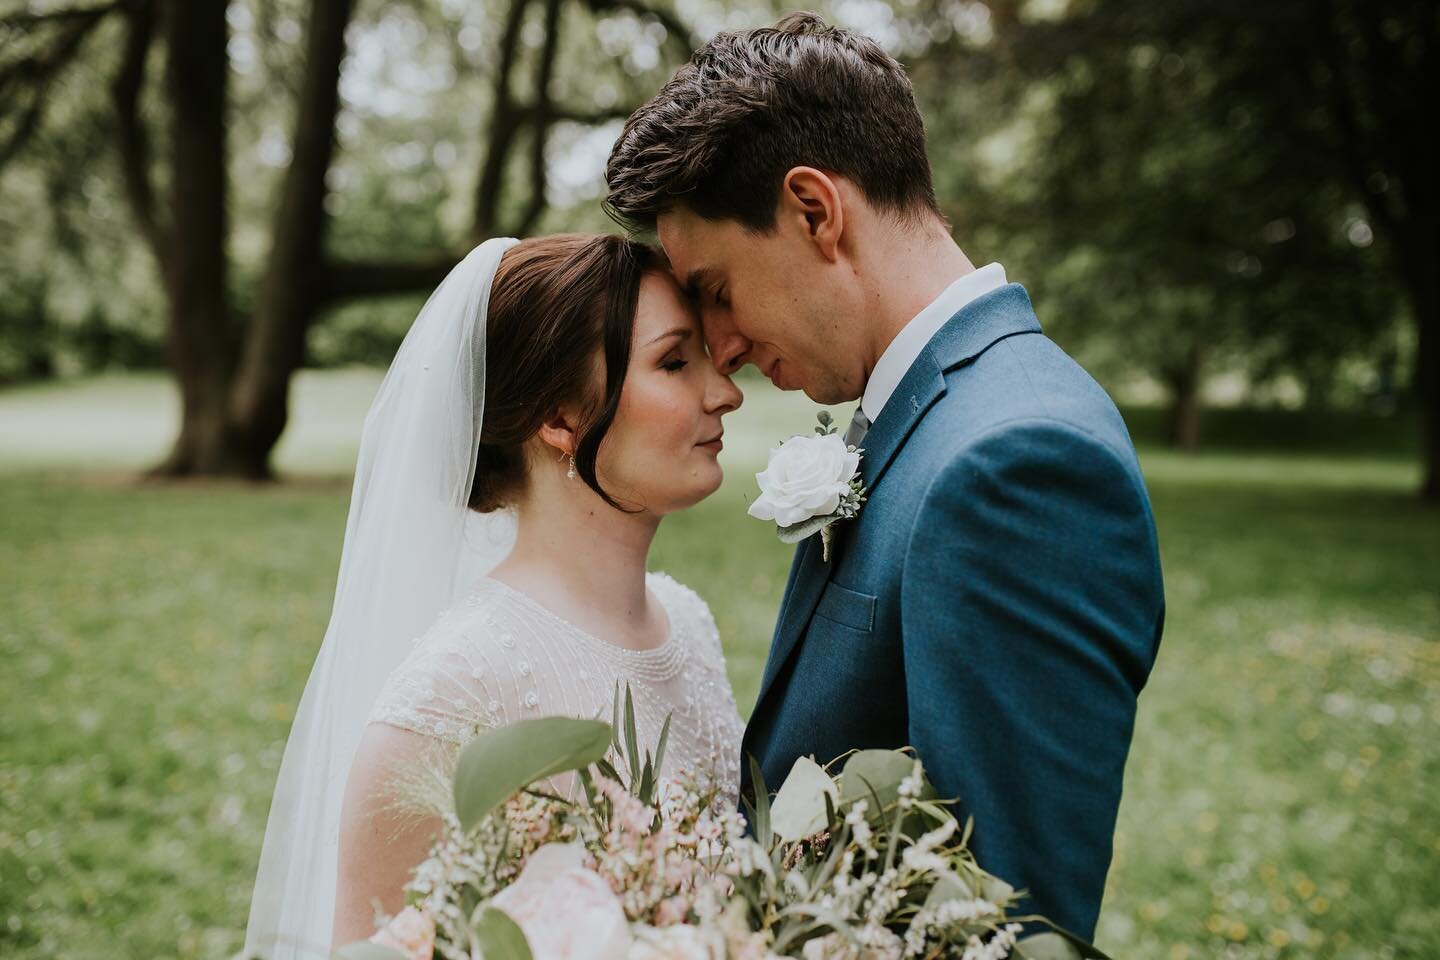 Another favourite from this day ✨

MUA / Hair: @afterglowhmua 
Dress: @cardiffbridalcentre 
Flowers: @wildmeadowfloral 
Venue: @cornerstonecardiff 
Ceremony: @citychurchcardiff 

#cardiffwedding #microwedding #marrynowpartylater #southwaleswedding #c